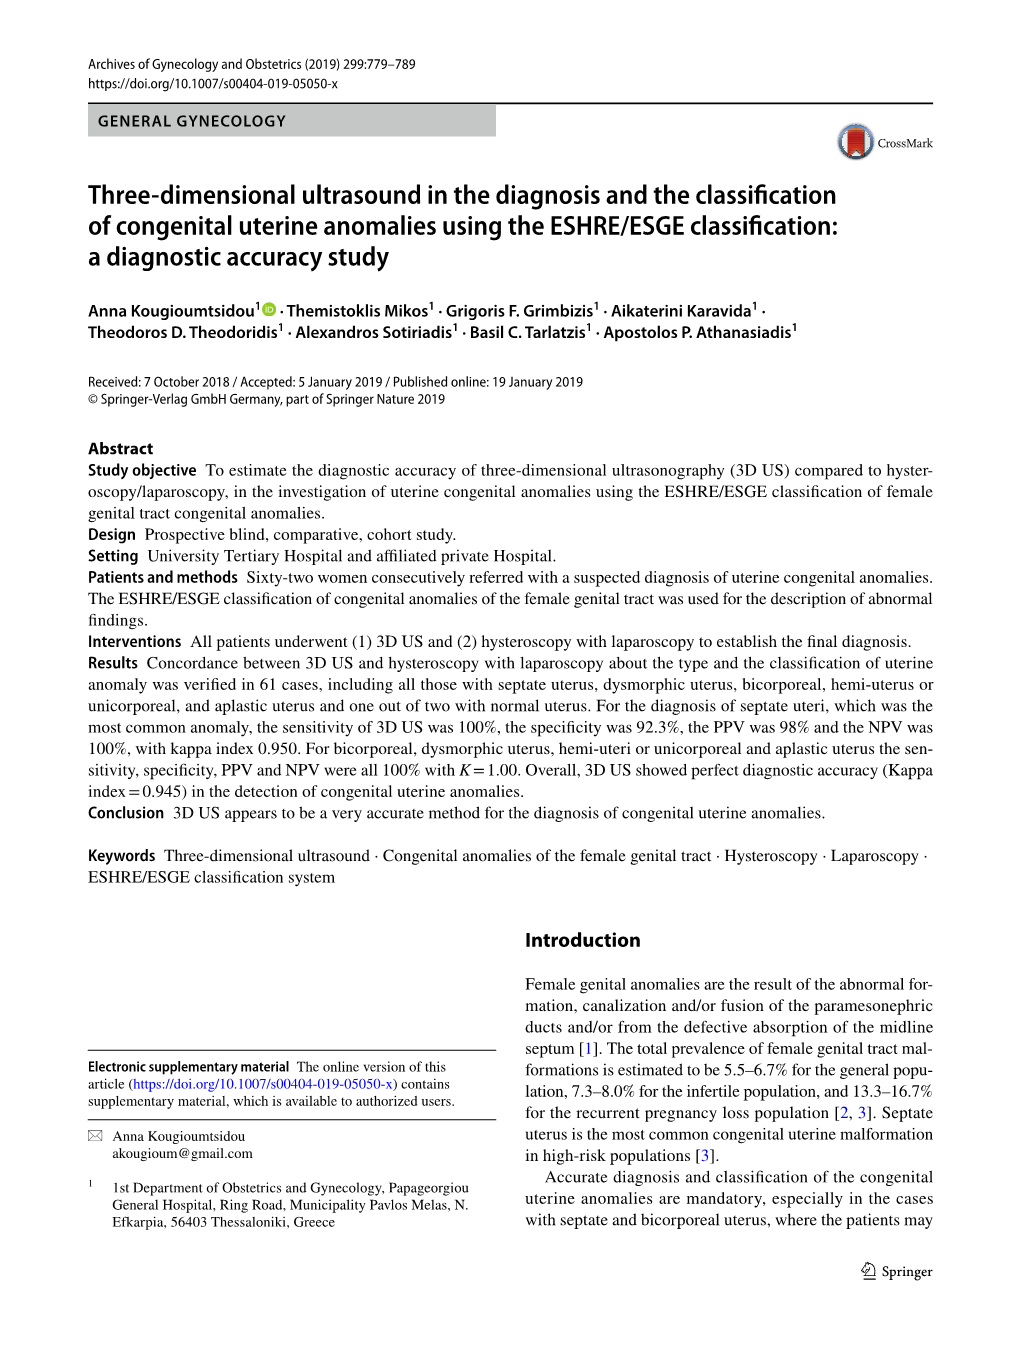 Three-Dimensional Ultrasound in the Diagnosis and the Classification Of